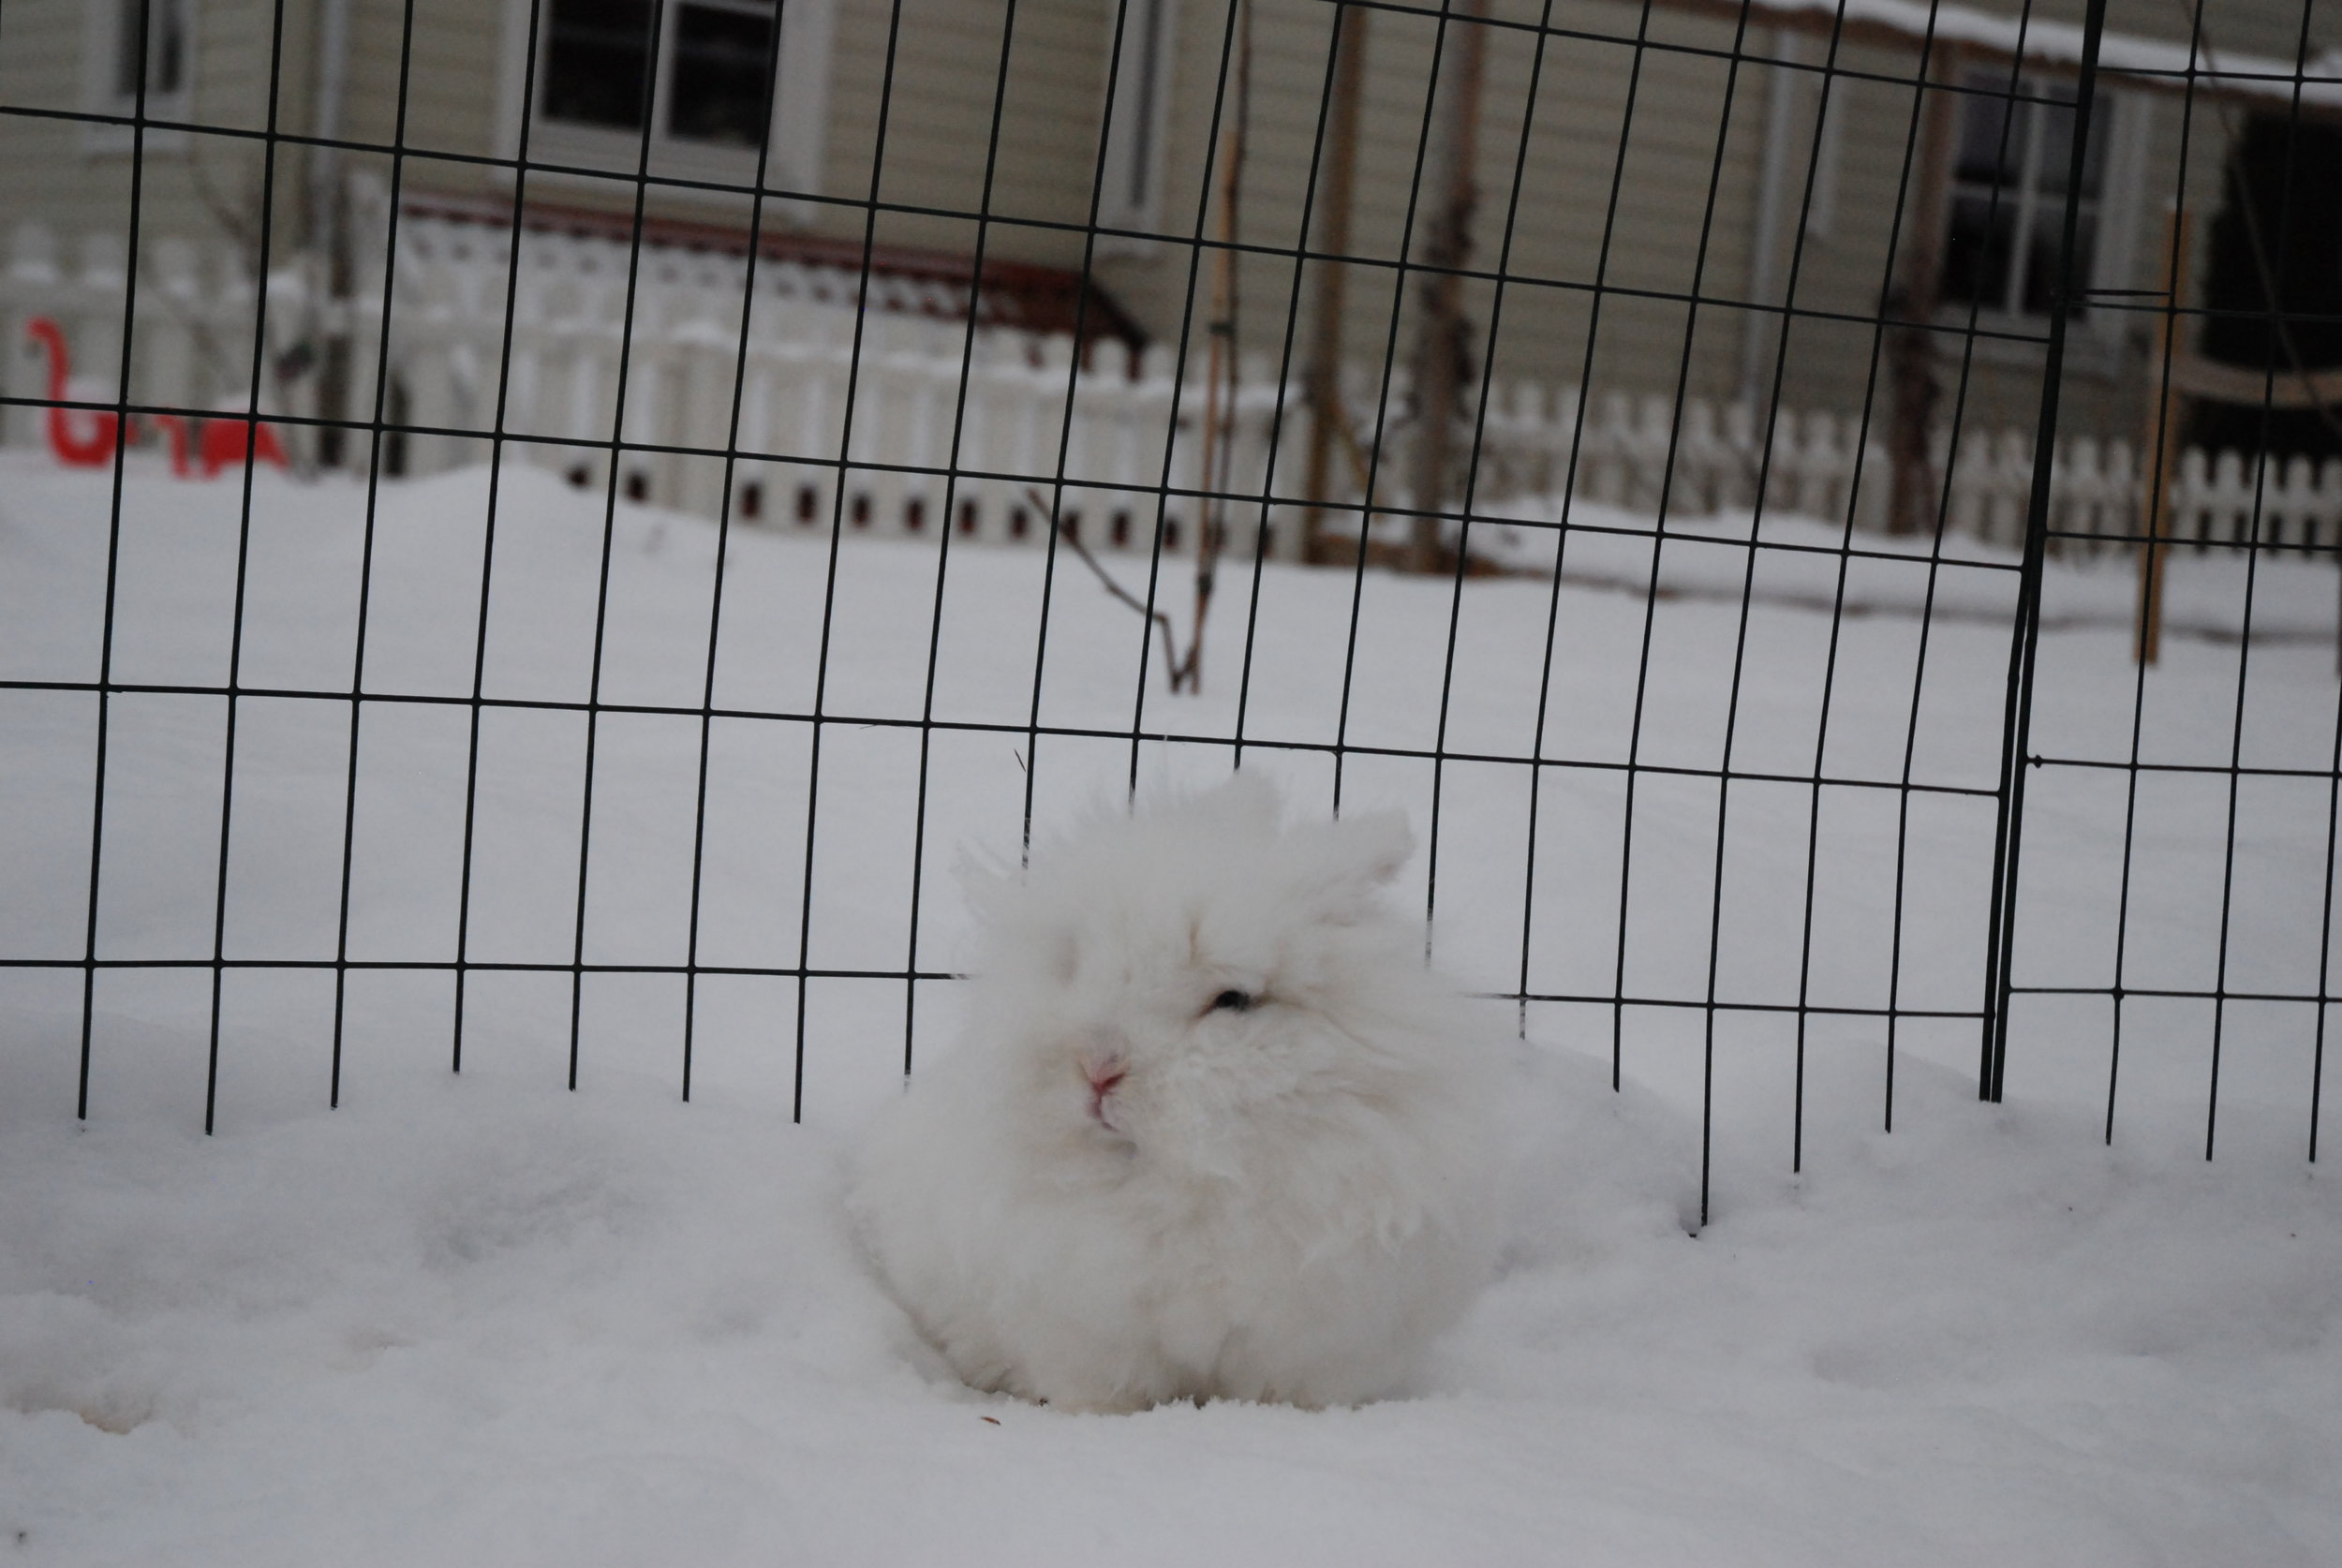 Where Does the Snow End and the Bunny Begin? 2